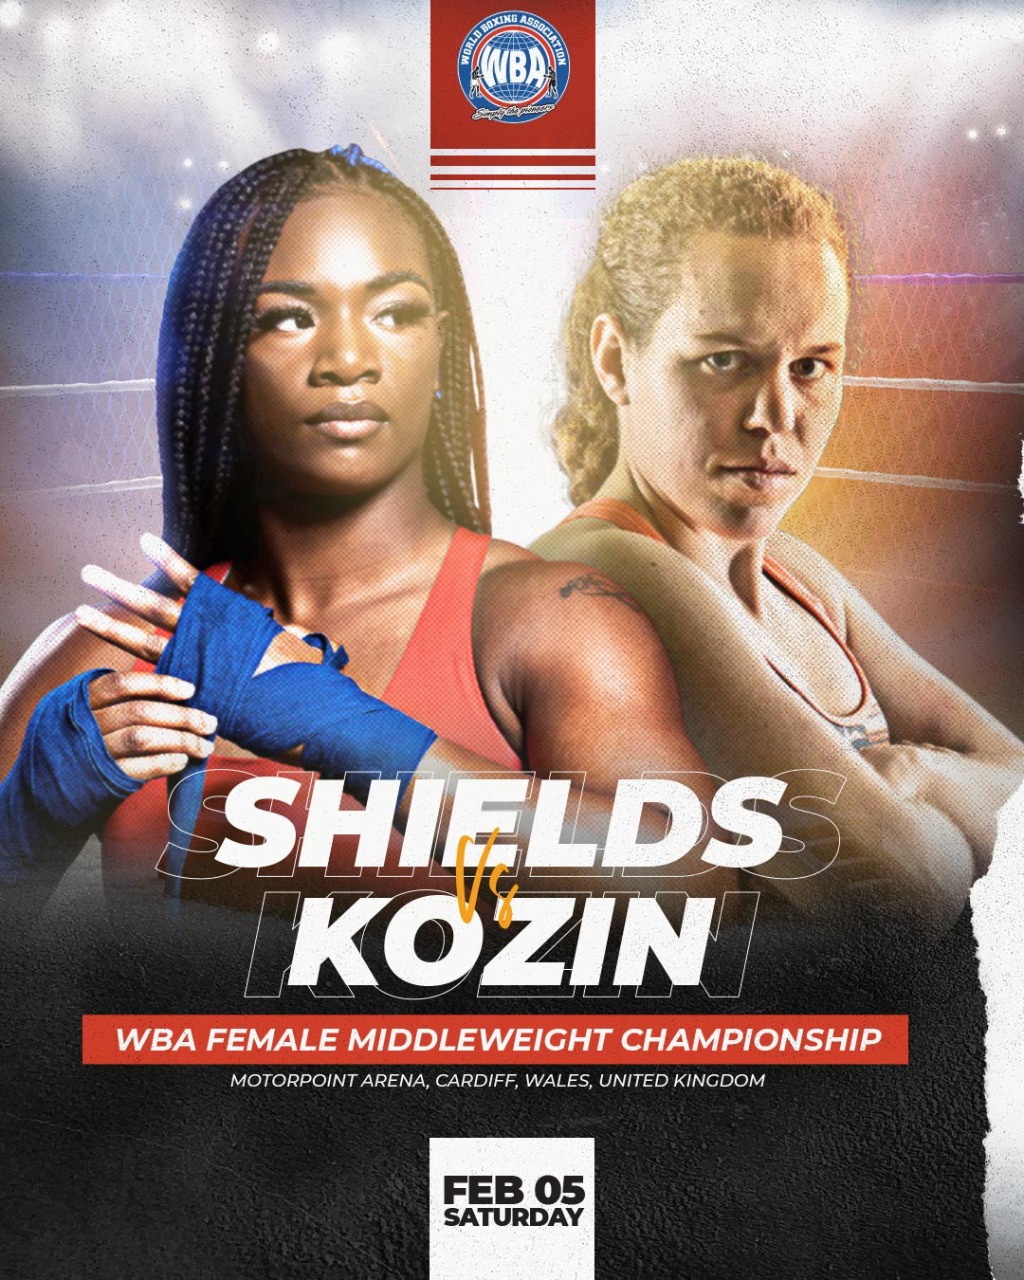 Shields and Kozin on Saturday for the middleweight championship